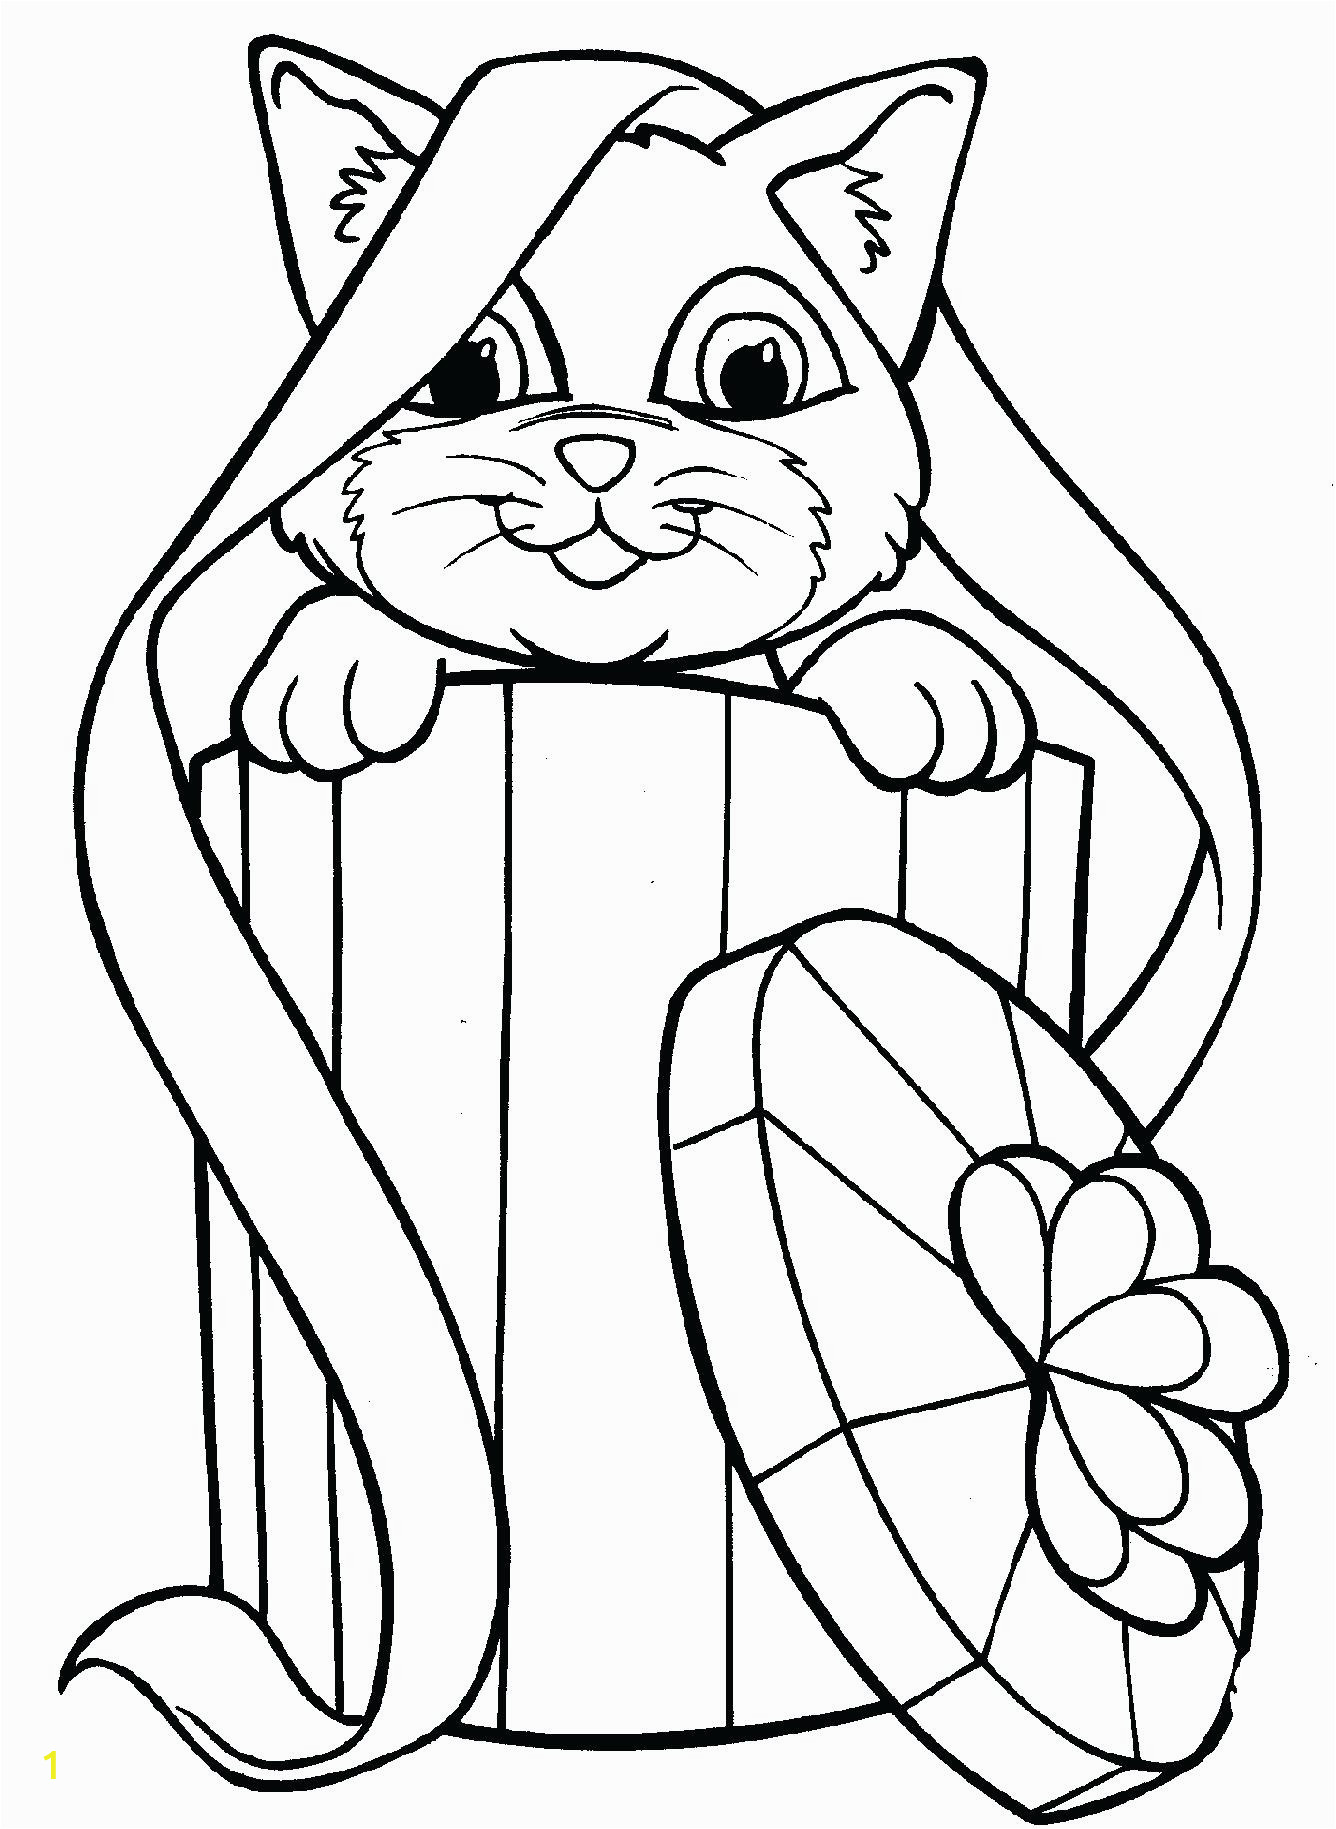 Free Coloring Pages Of Puppies and Kittens Puppy and Kitten Drawing at Getdrawings